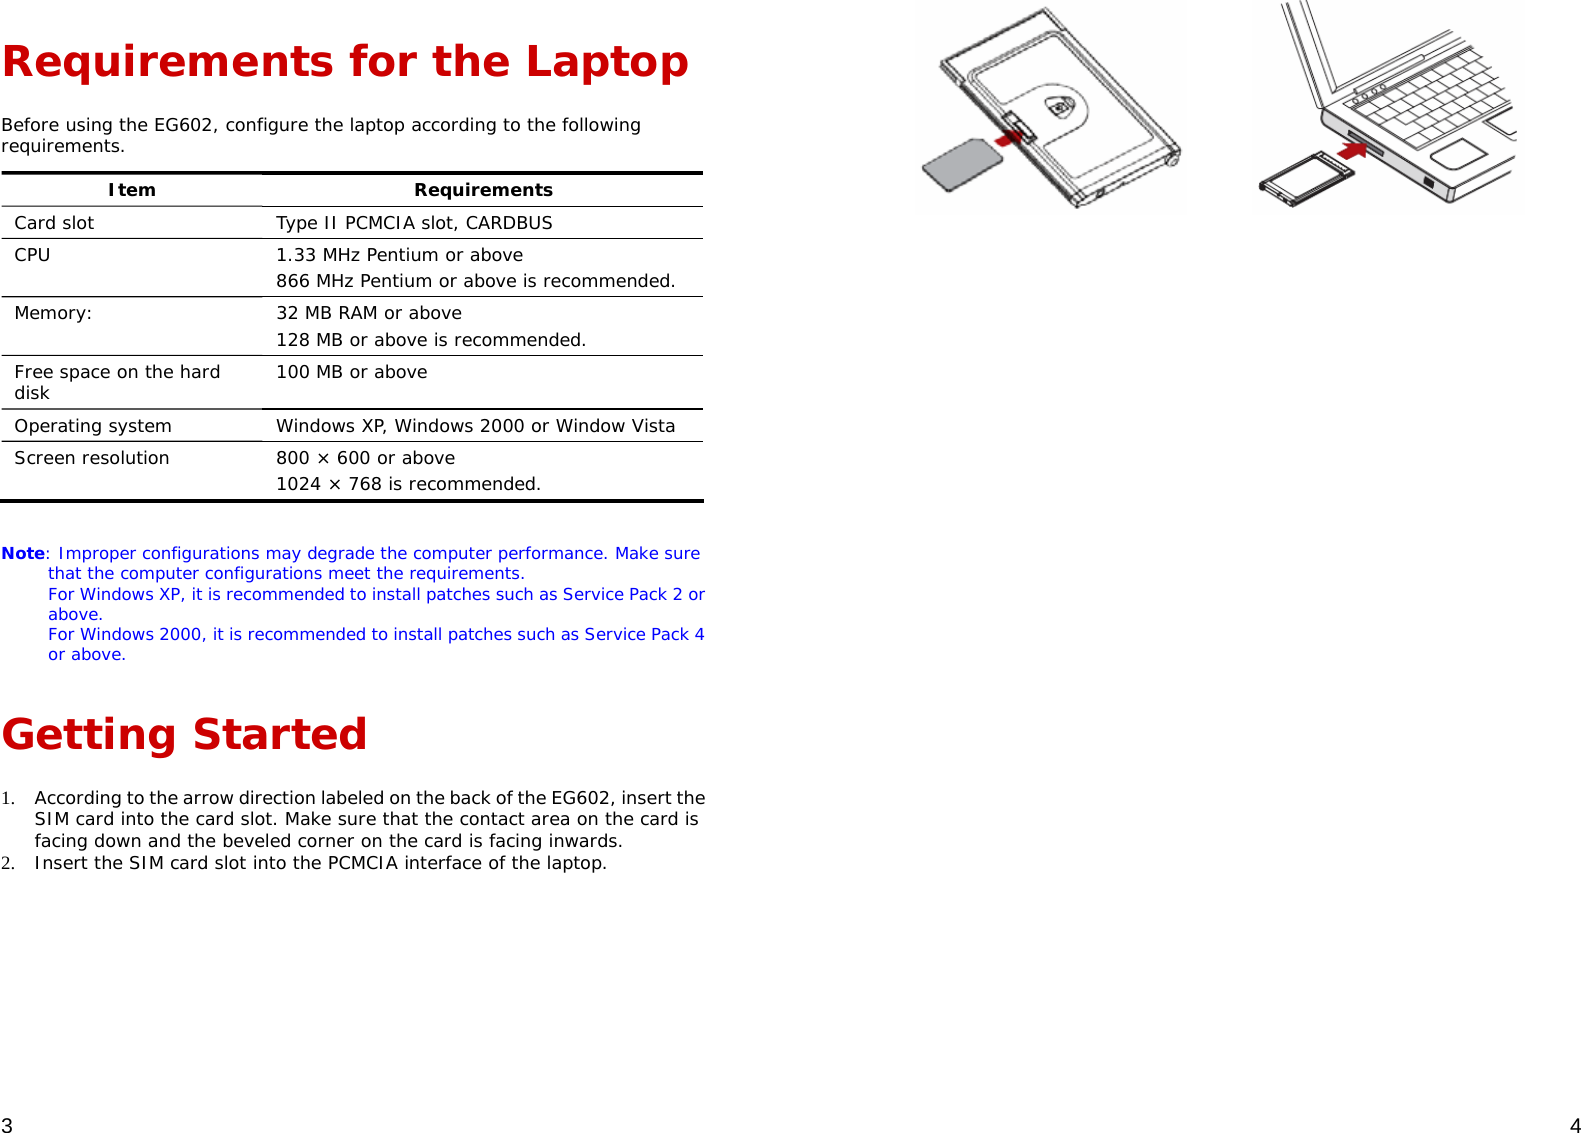  3 Requirements for the Laptop Before using the EG602, configure the laptop according to the following requirements.  Item Requirements Card slot  Type II PCMCIA slot, CARDBUS CPU  1.33 MHz Pentium or above 866 MHz Pentium or above is recommended. Memory:  32 MB RAM or above 128 MB or above is recommended. Free space on the hard disk  100 MB or above Operating system  Windows XP, Windows 2000 or Window Vista Screen resolution  800 × 600 or above 1024 × 768 is recommended.  Note: Improper configurations may degrade the computer performance. Make sure that the computer configurations meet the requirements. For Windows XP, it is recommended to install patches such as Service Pack 2 or above. For Windows 2000, it is recommended to install patches such as Service Pack 4 or above. Getting Started 1. According to the arrow direction labeled on the back of the EG602, insert the SIM card into the card slot. Make sure that the contact area on the card is facing down and the beveled corner on the card is facing inwards. 2. Insert the SIM card slot into the PCMCIA interface of the laptop.   4              